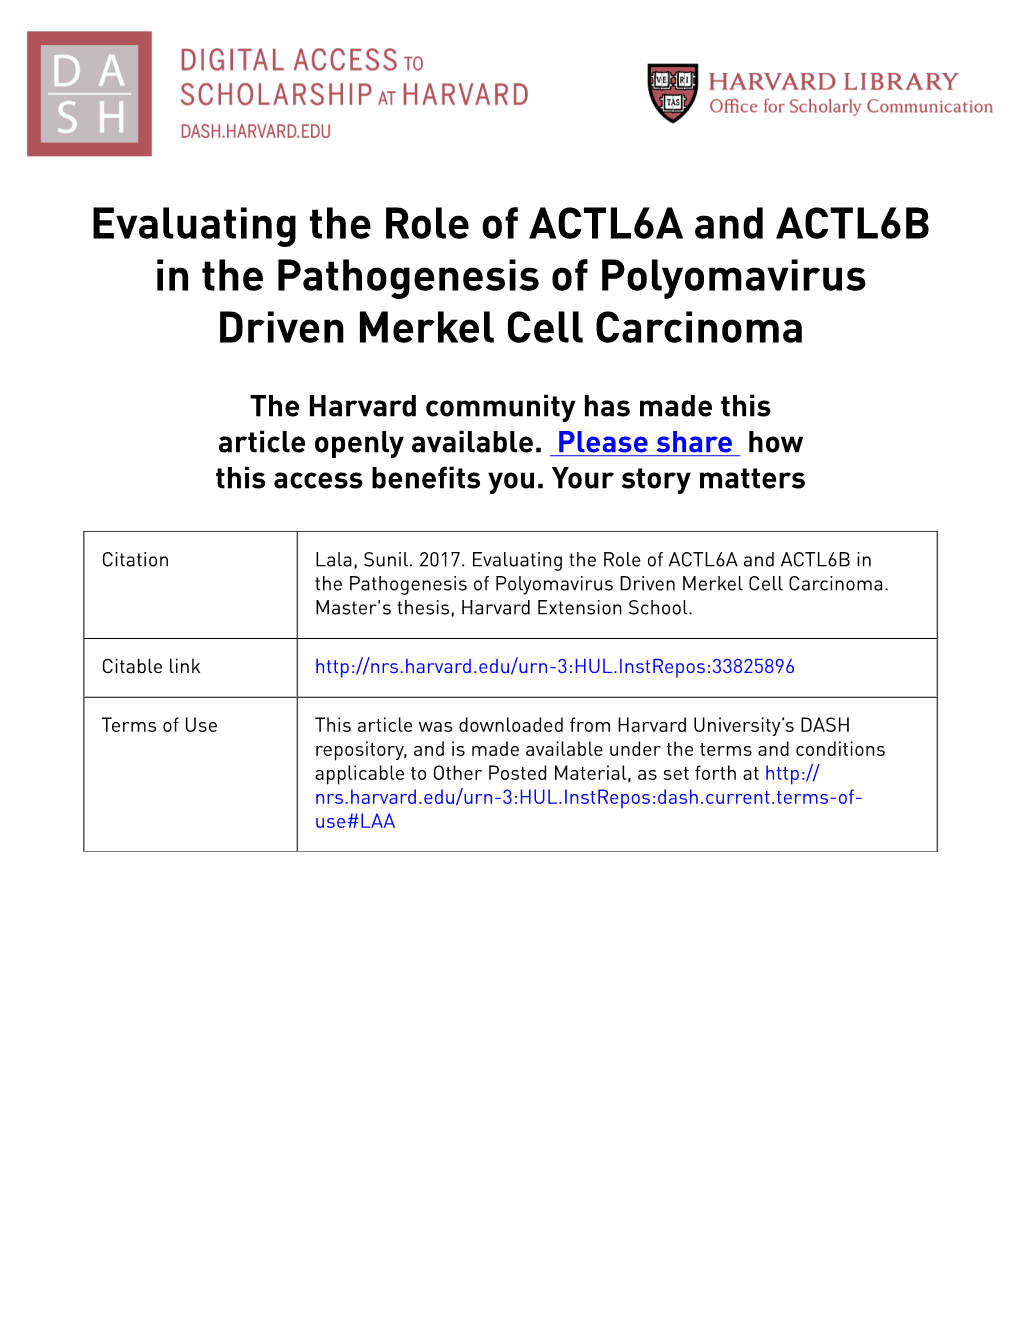 Evaluating the Role of ACTL6A and ACTL6B in the Pathogenesis of Polyomavirus Driven Merkel Cell Carcinoma